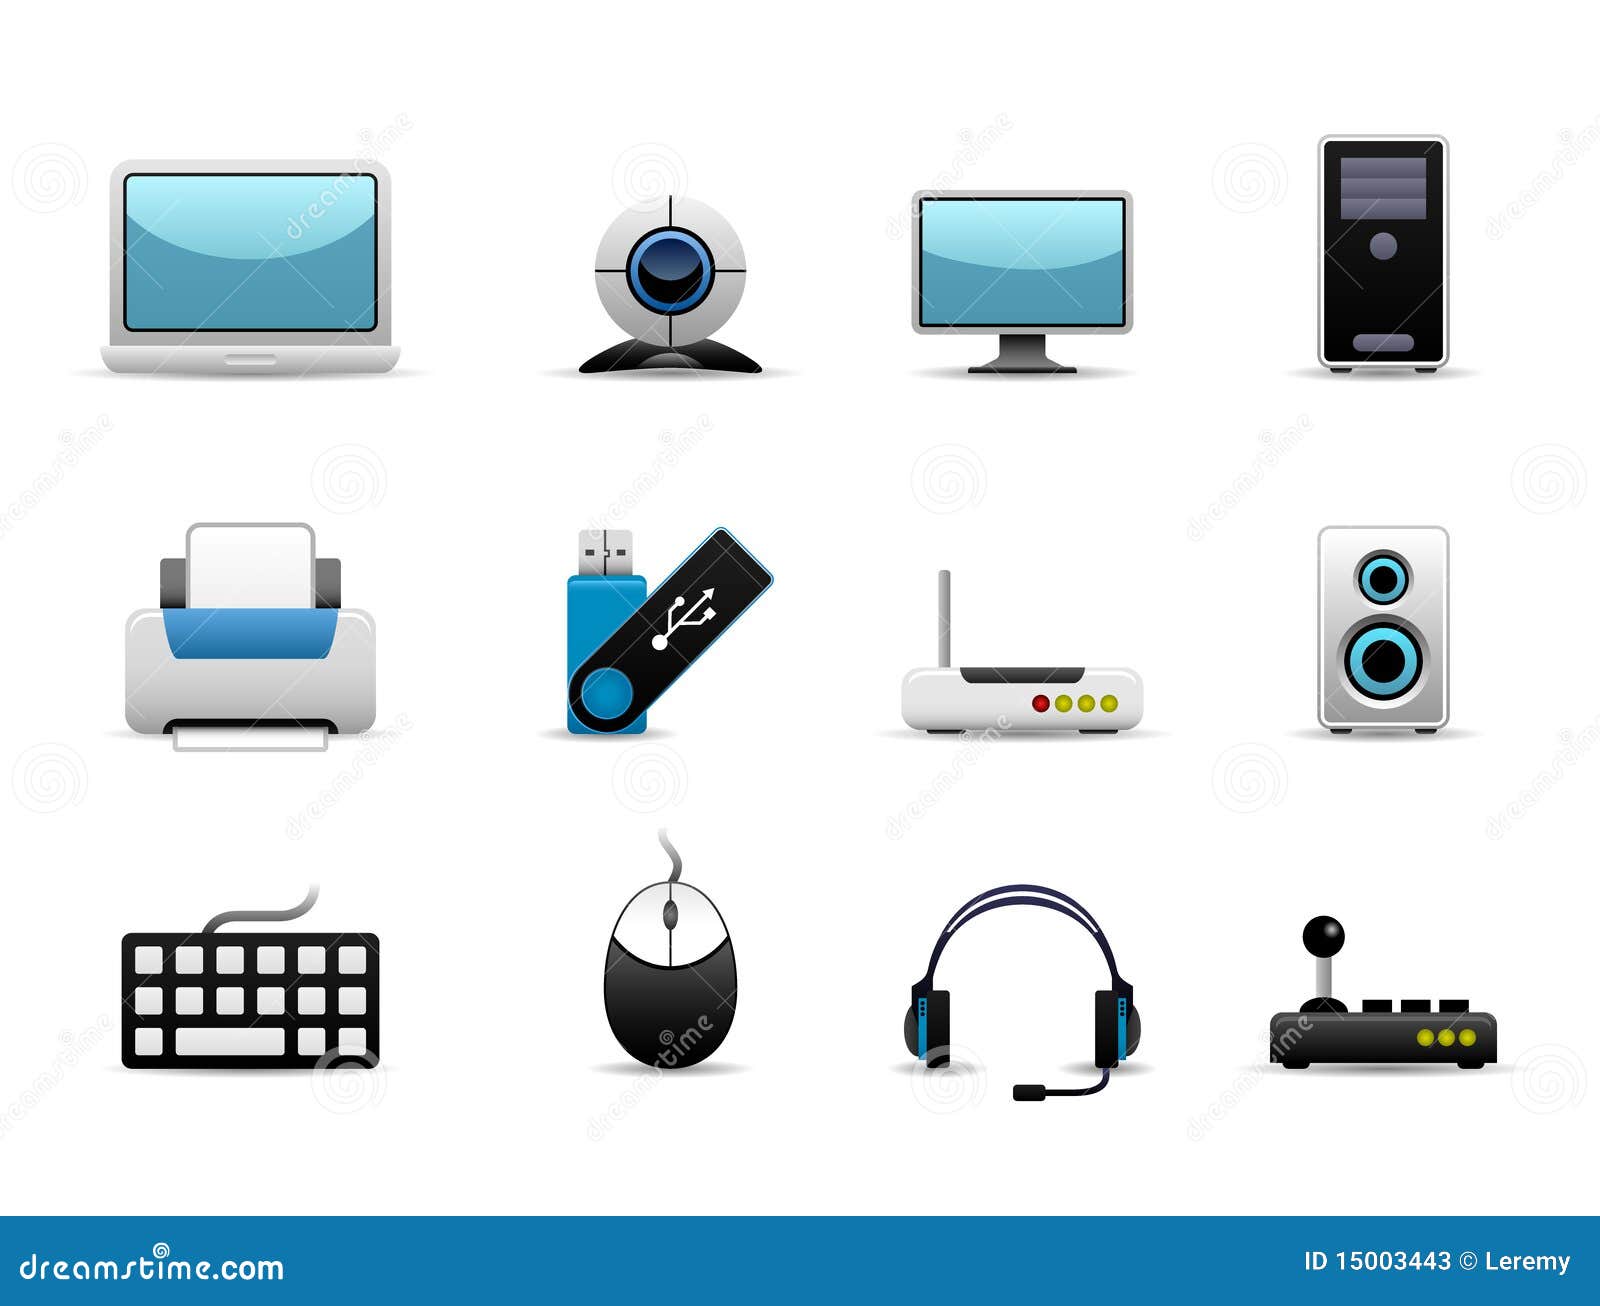 computer hardware clipart free - photo #49